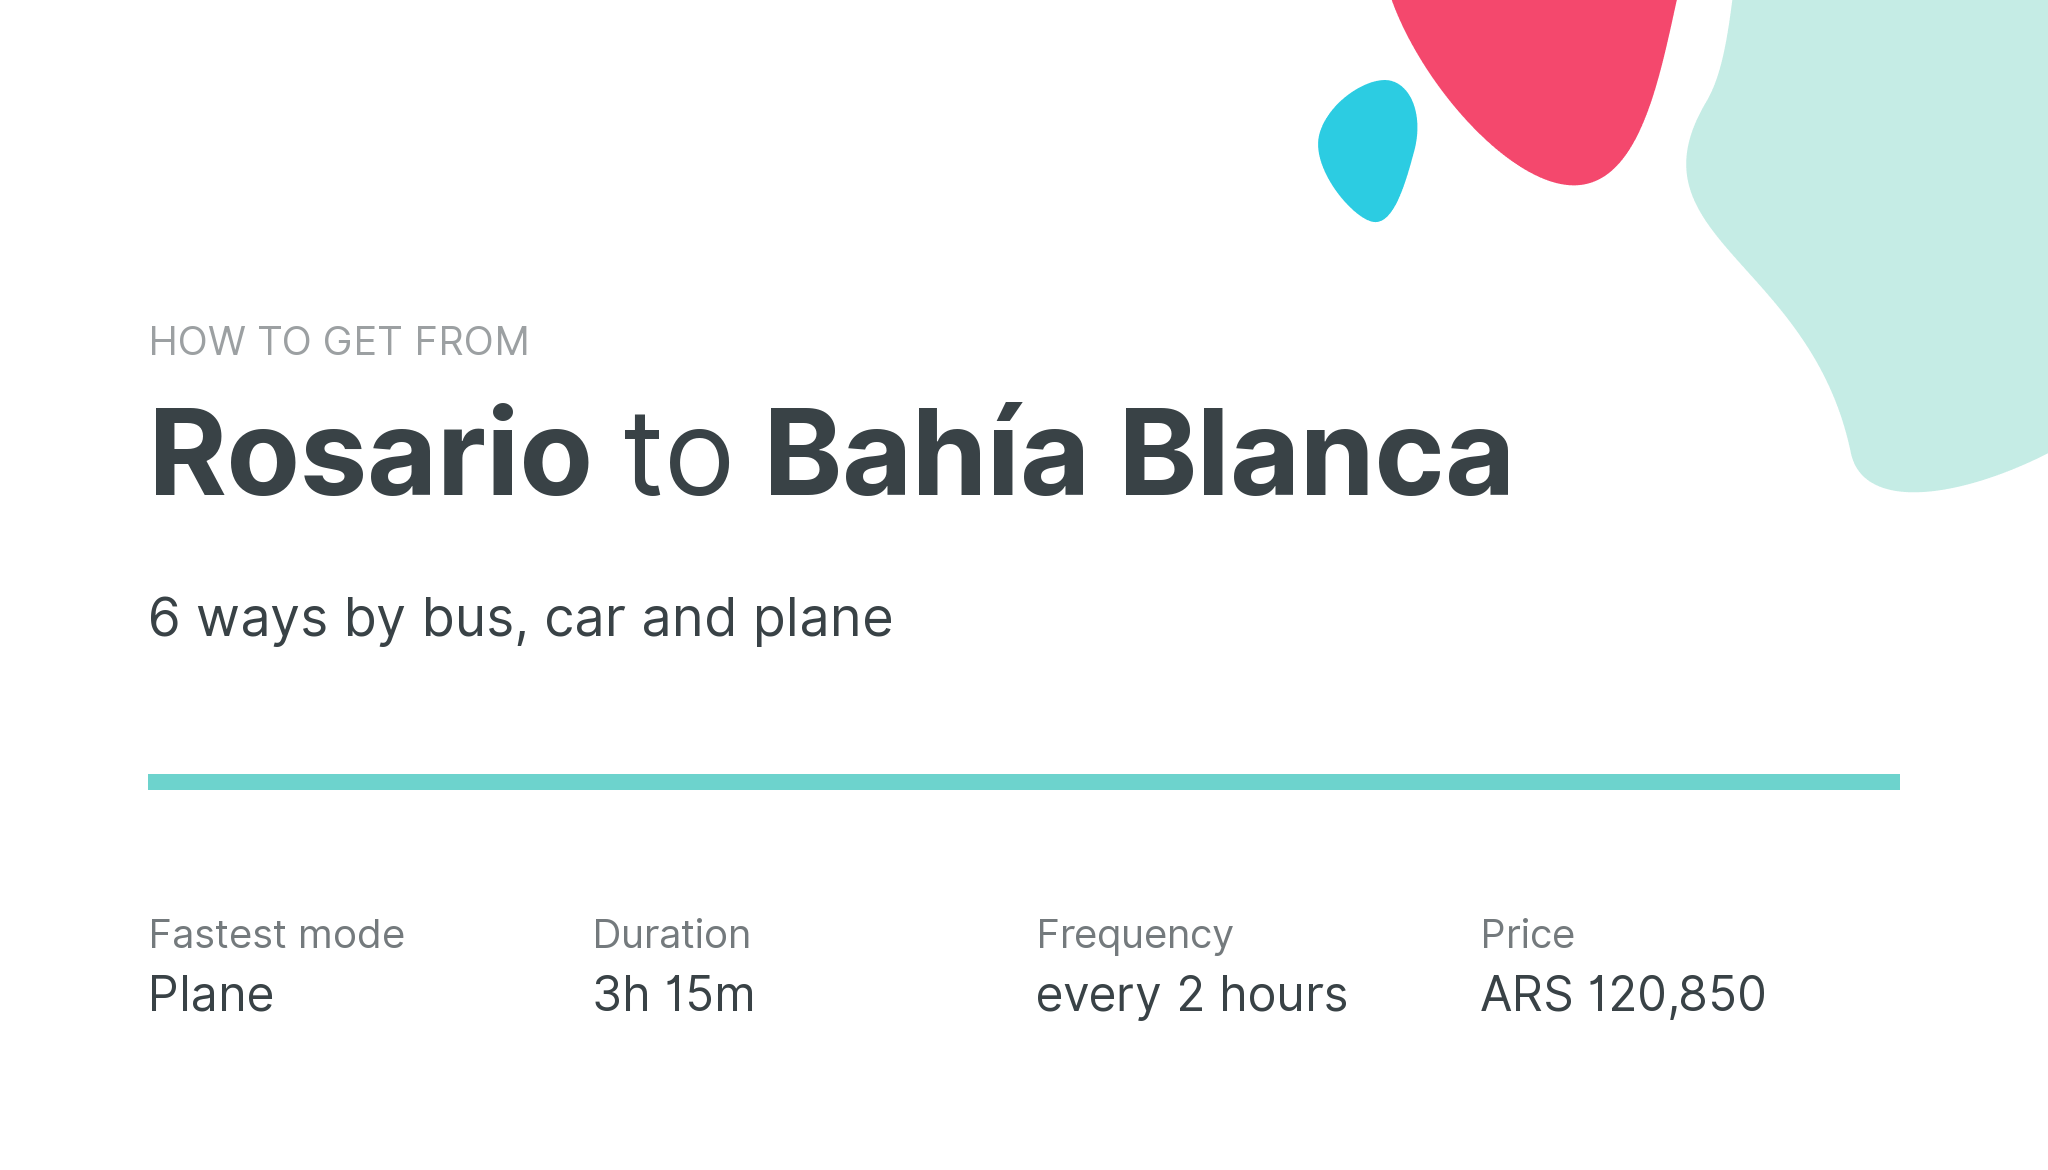 How do I get from Rosario to Bahía Blanca